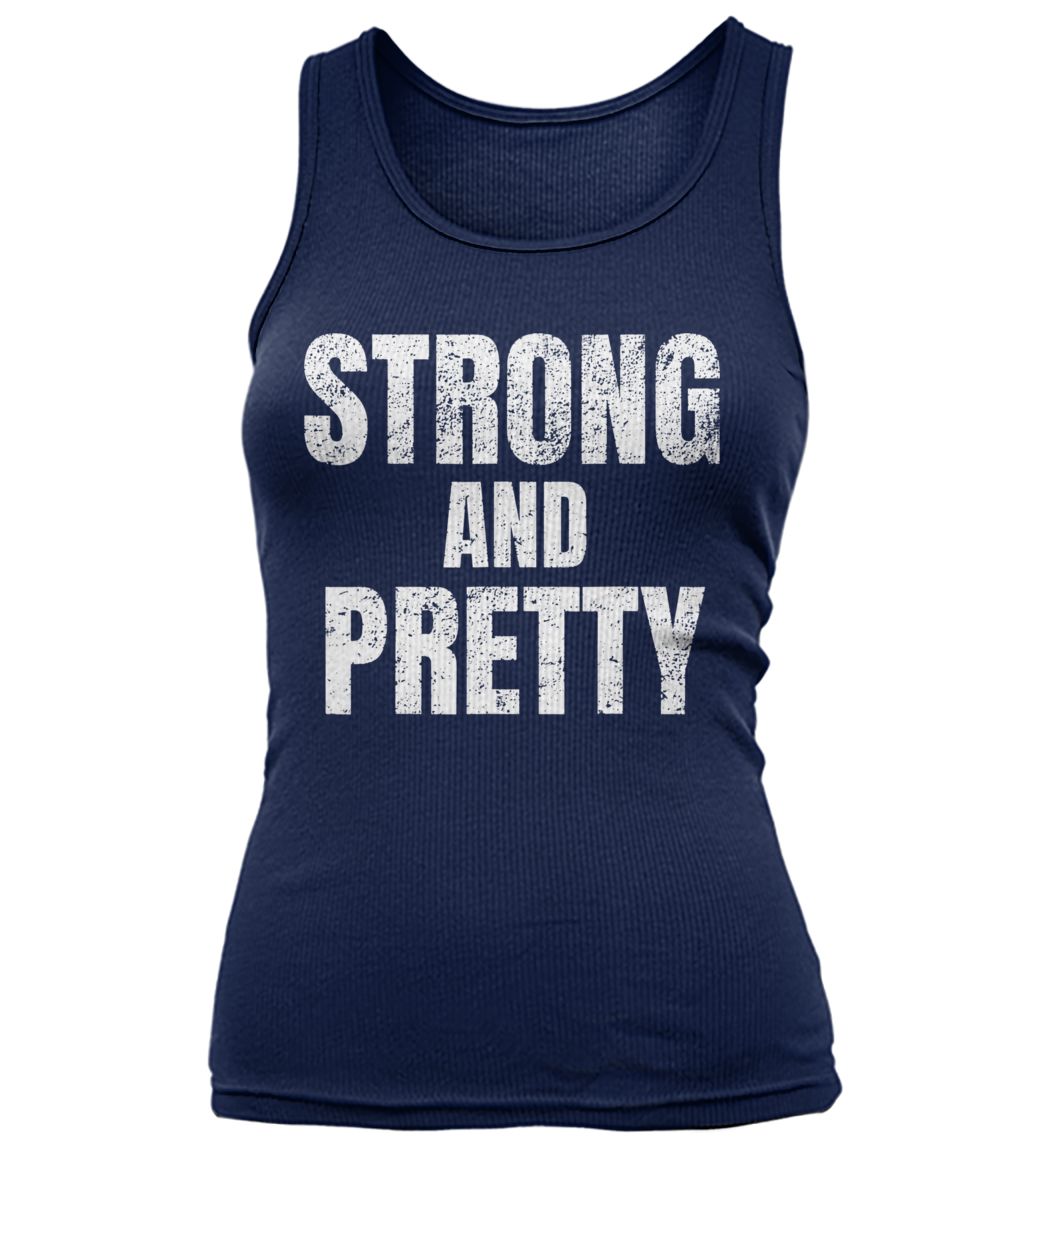 Motivation strong and pretty women's tank top